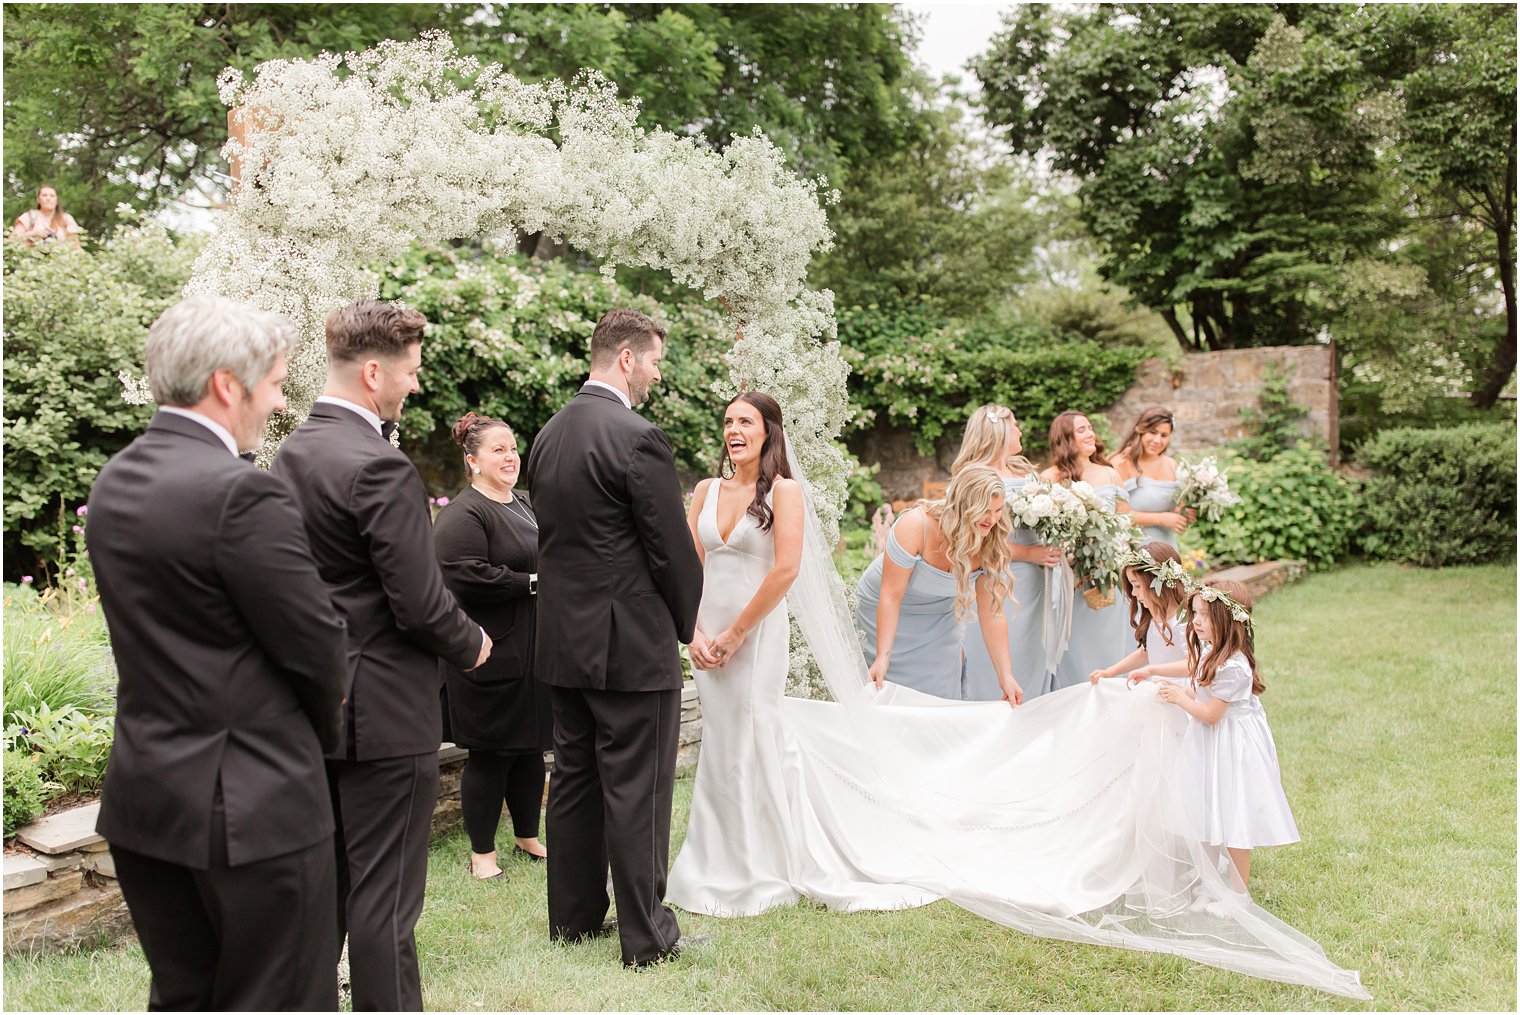 flower girls helping bride with dress during ceremony